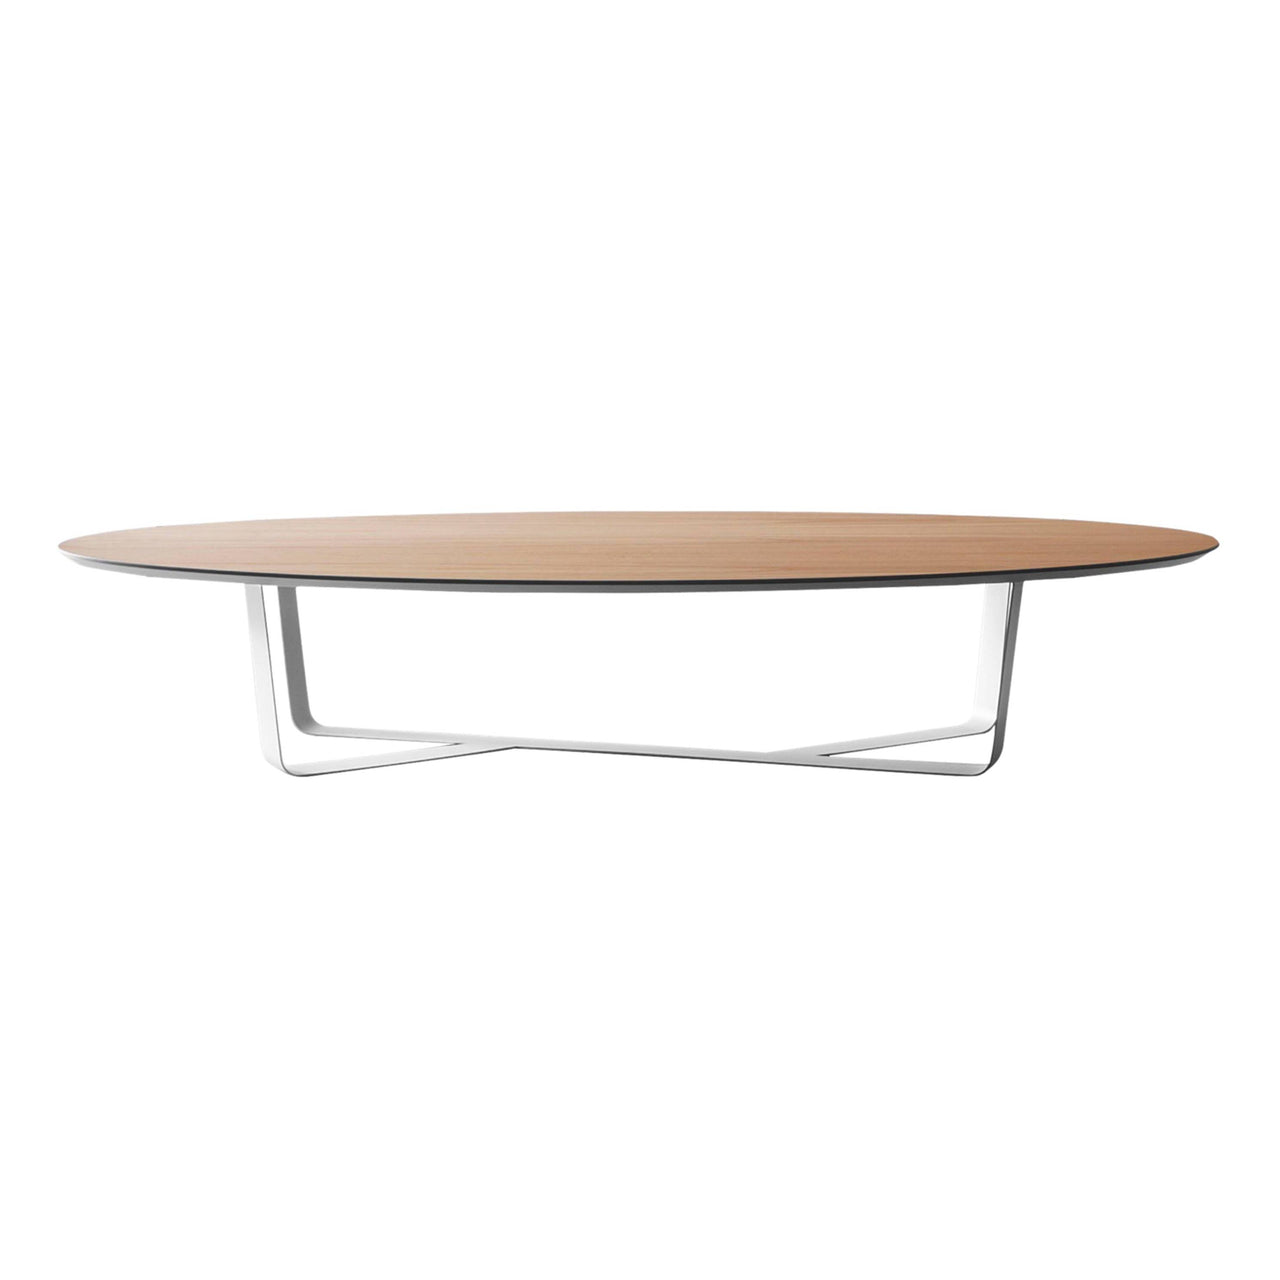 Bino Coffee Table: Large + Vintage Oak + Lacquered White